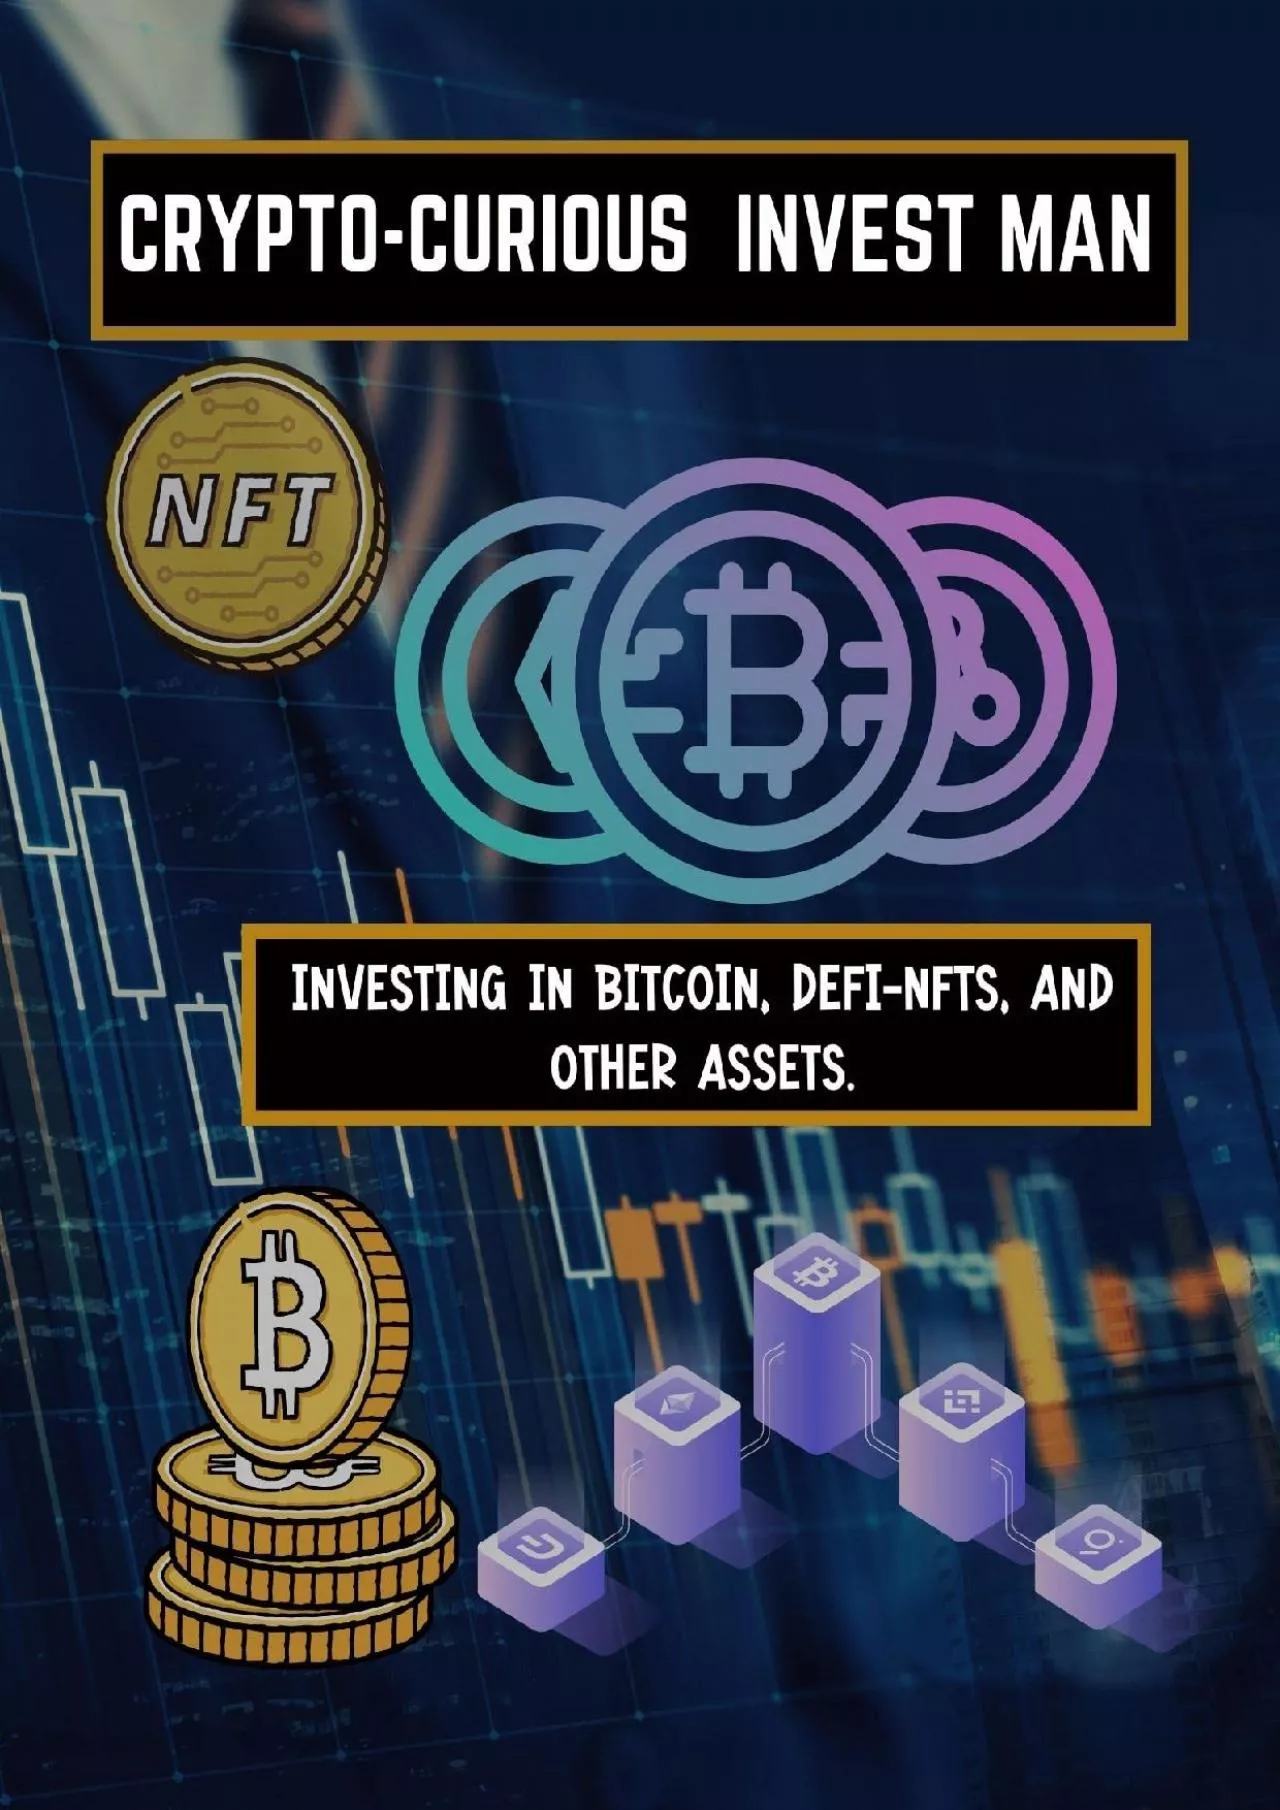 (BOOK)-Crypto-Curious invest man : Investing in Bitcoin, DeFi-NFTs, and Other Assets.